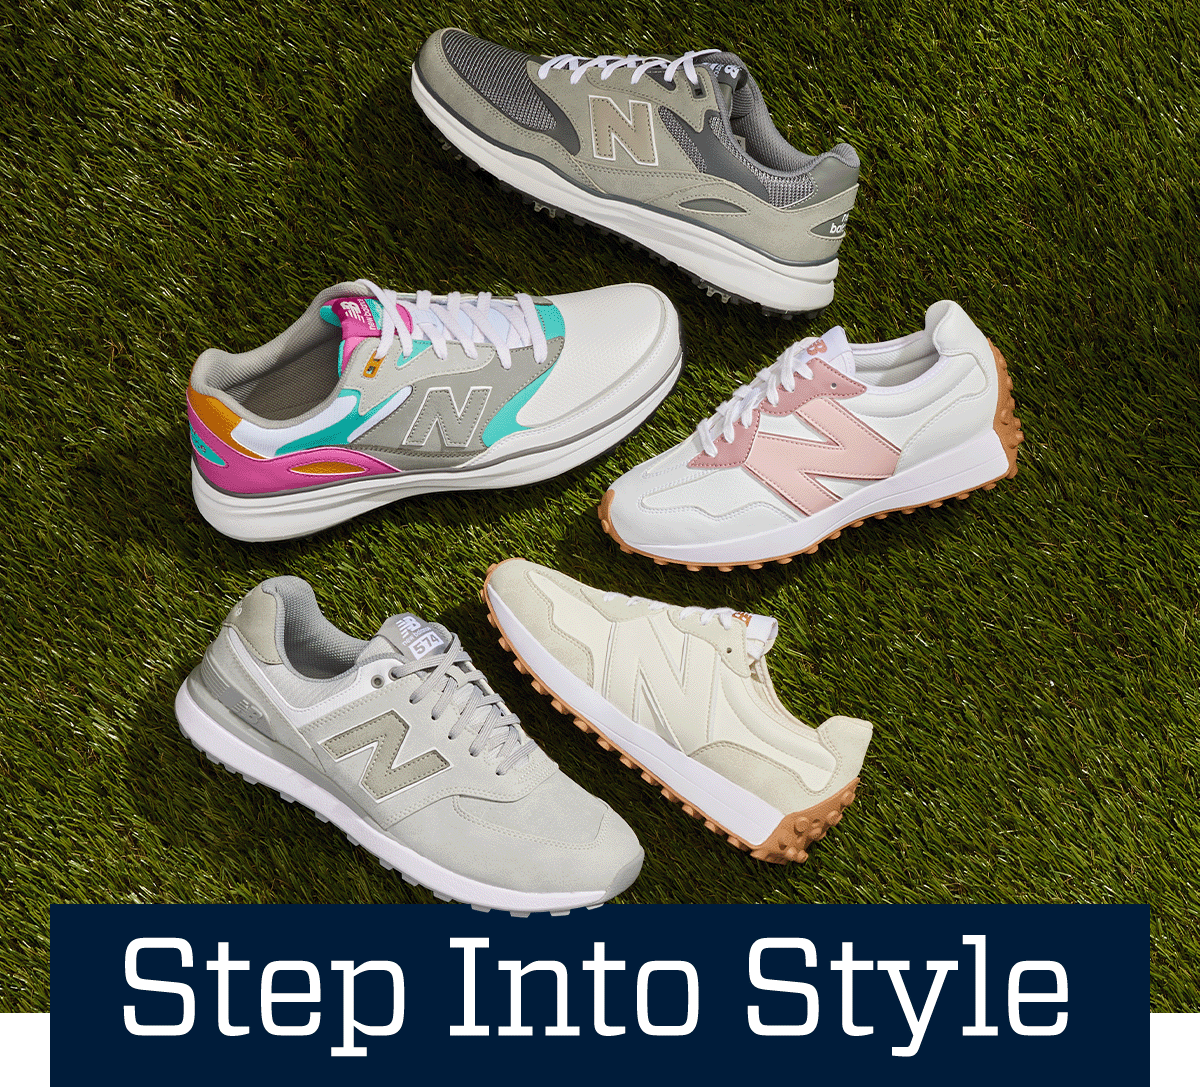  Step into style.